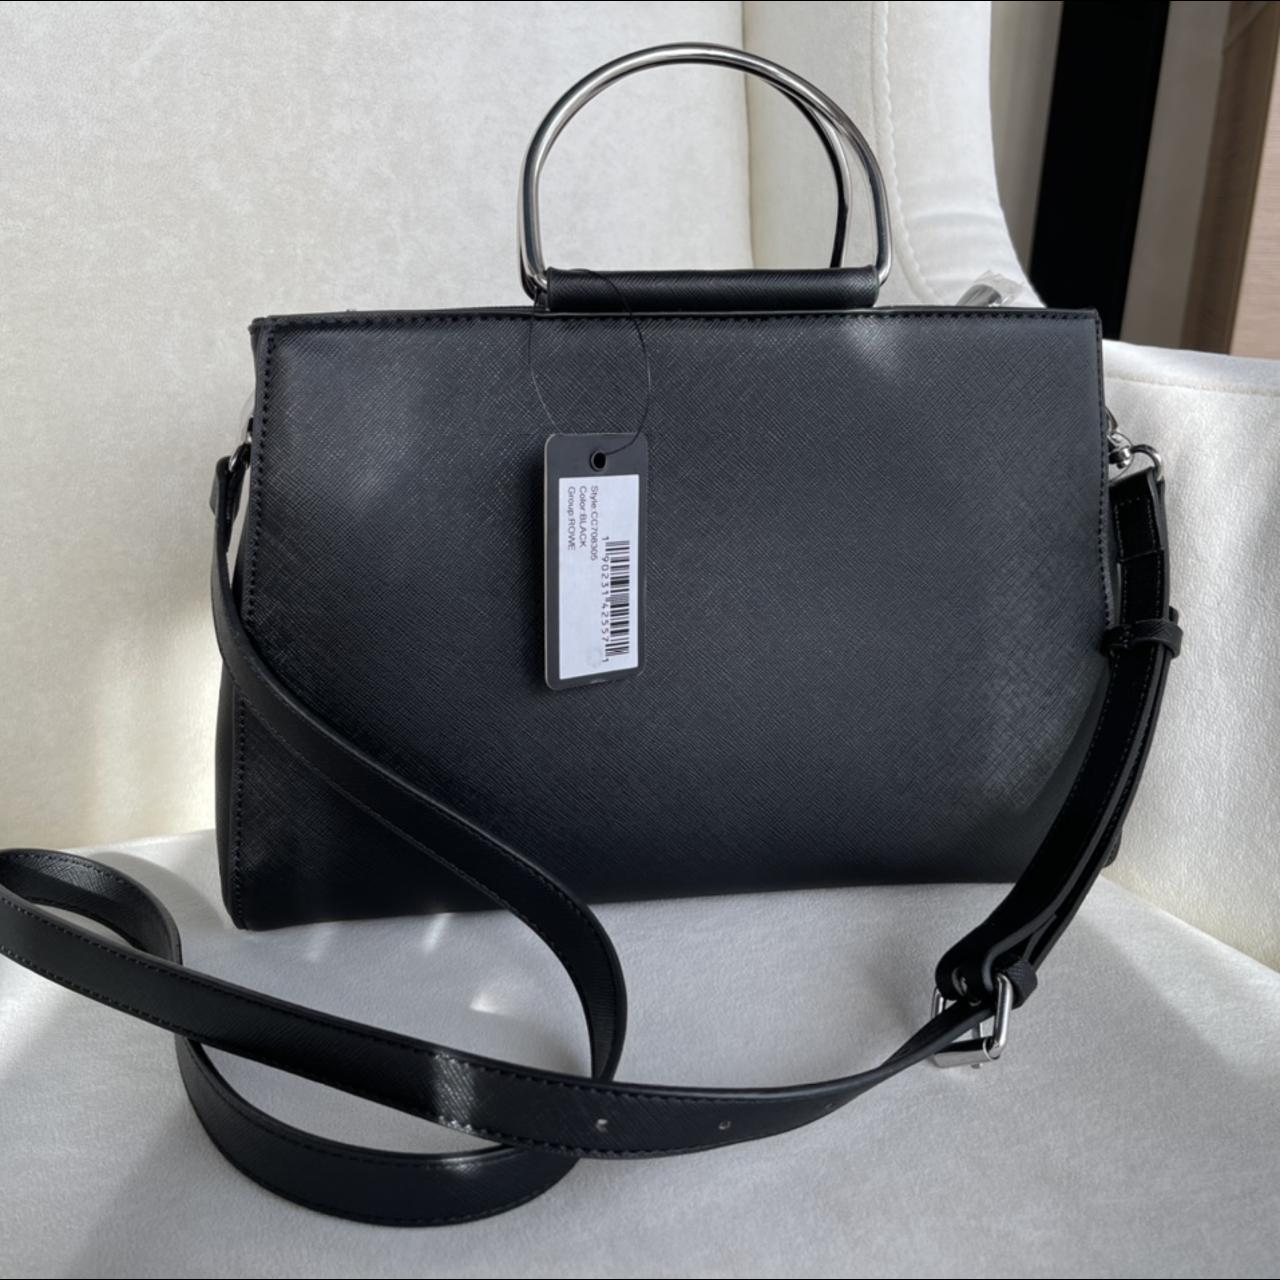 Guess Women's Black and Silver Bag (2)